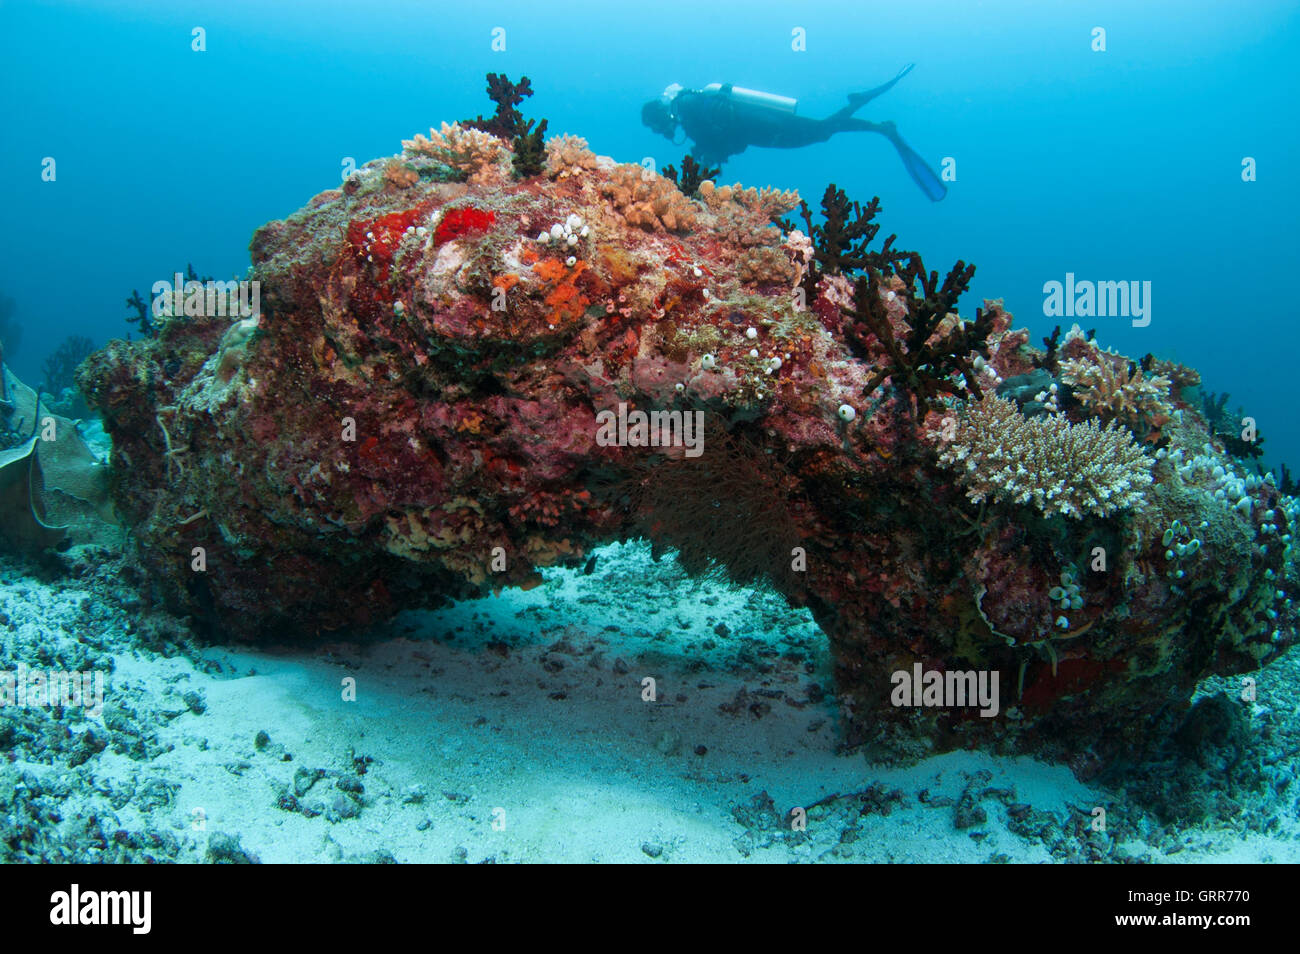 Large isolated rock with overgrowth of corals and colourful algae. Stock Photo